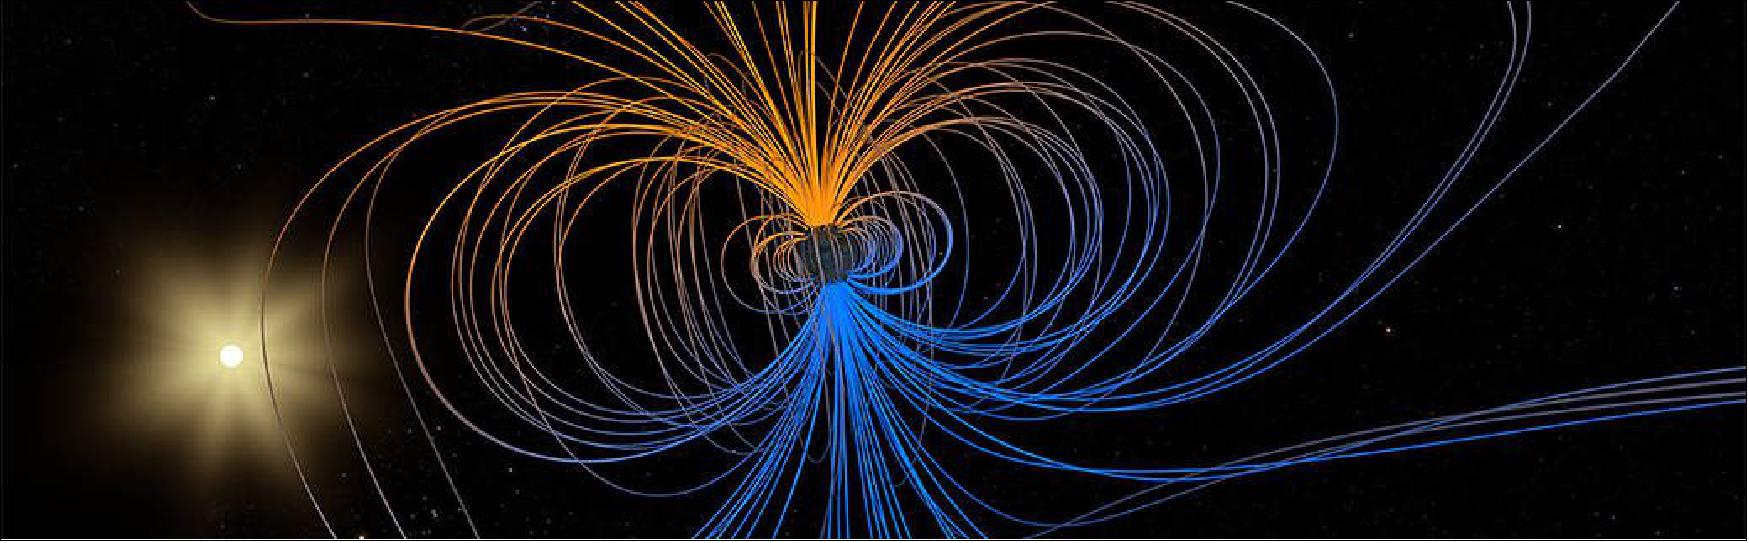 Figure 58: This stereoscopic visualization shows a simple model of the Earth's magnetic field. The magnetic field partially shields the Earth from harmful charged particles emanating from the Sun (image credit: NASA's Goddard Space Flight Center)